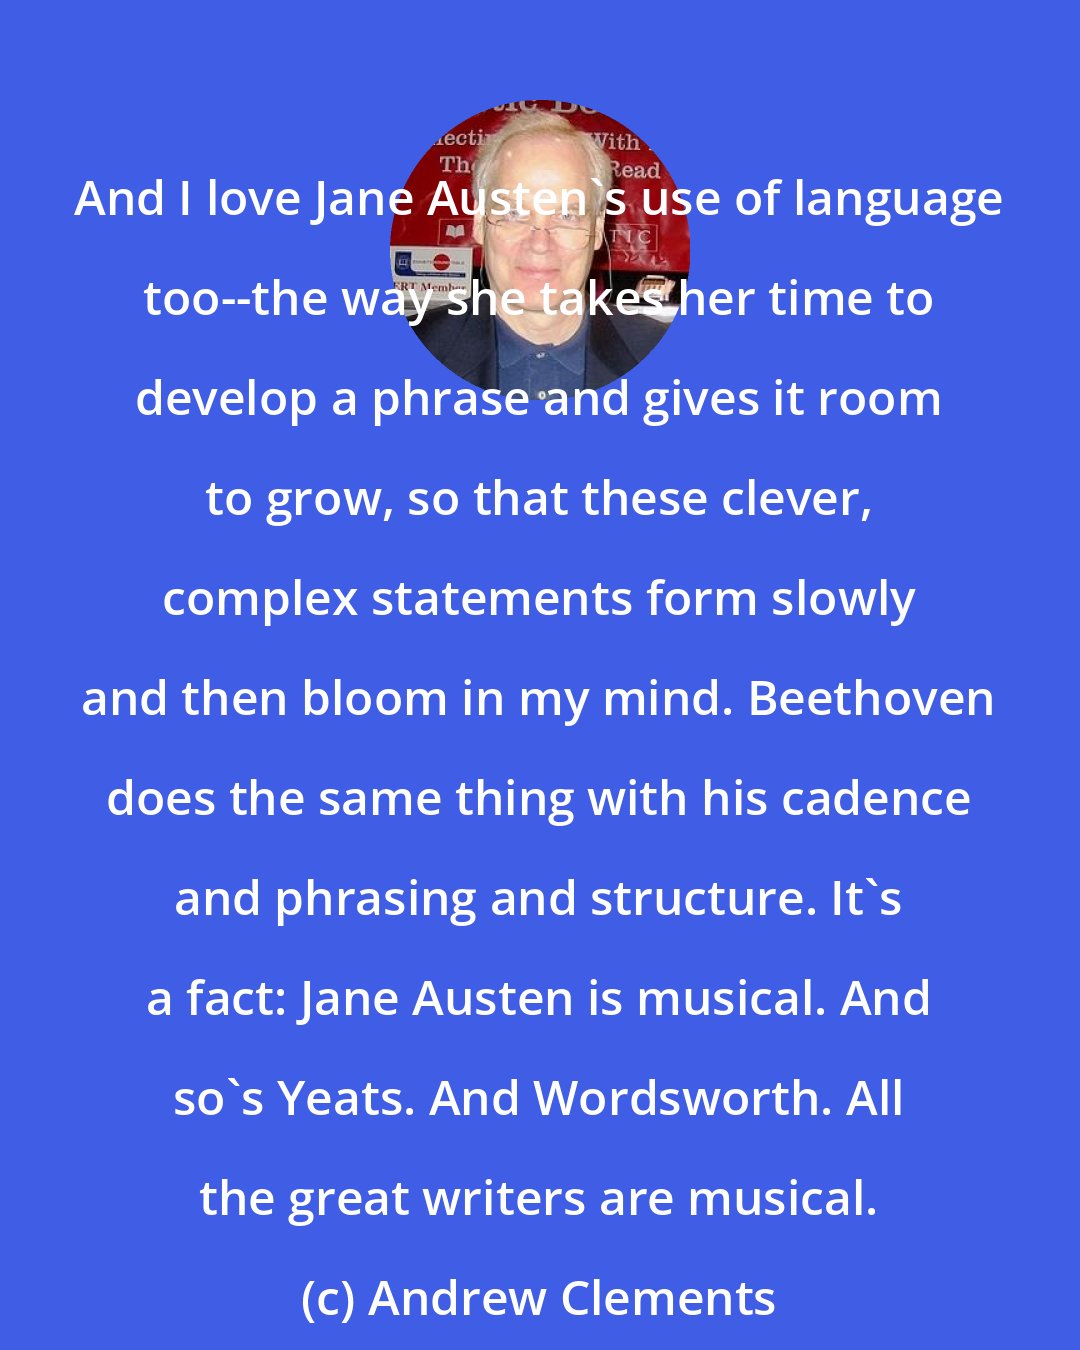 Andrew Clements: And I love Jane Austen's use of language too--the way she takes her time to develop a phrase and gives it room to grow, so that these clever, complex statements form slowly and then bloom in my mind. Beethoven does the same thing with his cadence and phrasing and structure. It's a fact: Jane Austen is musical. And so's Yeats. And Wordsworth. All the great writers are musical.